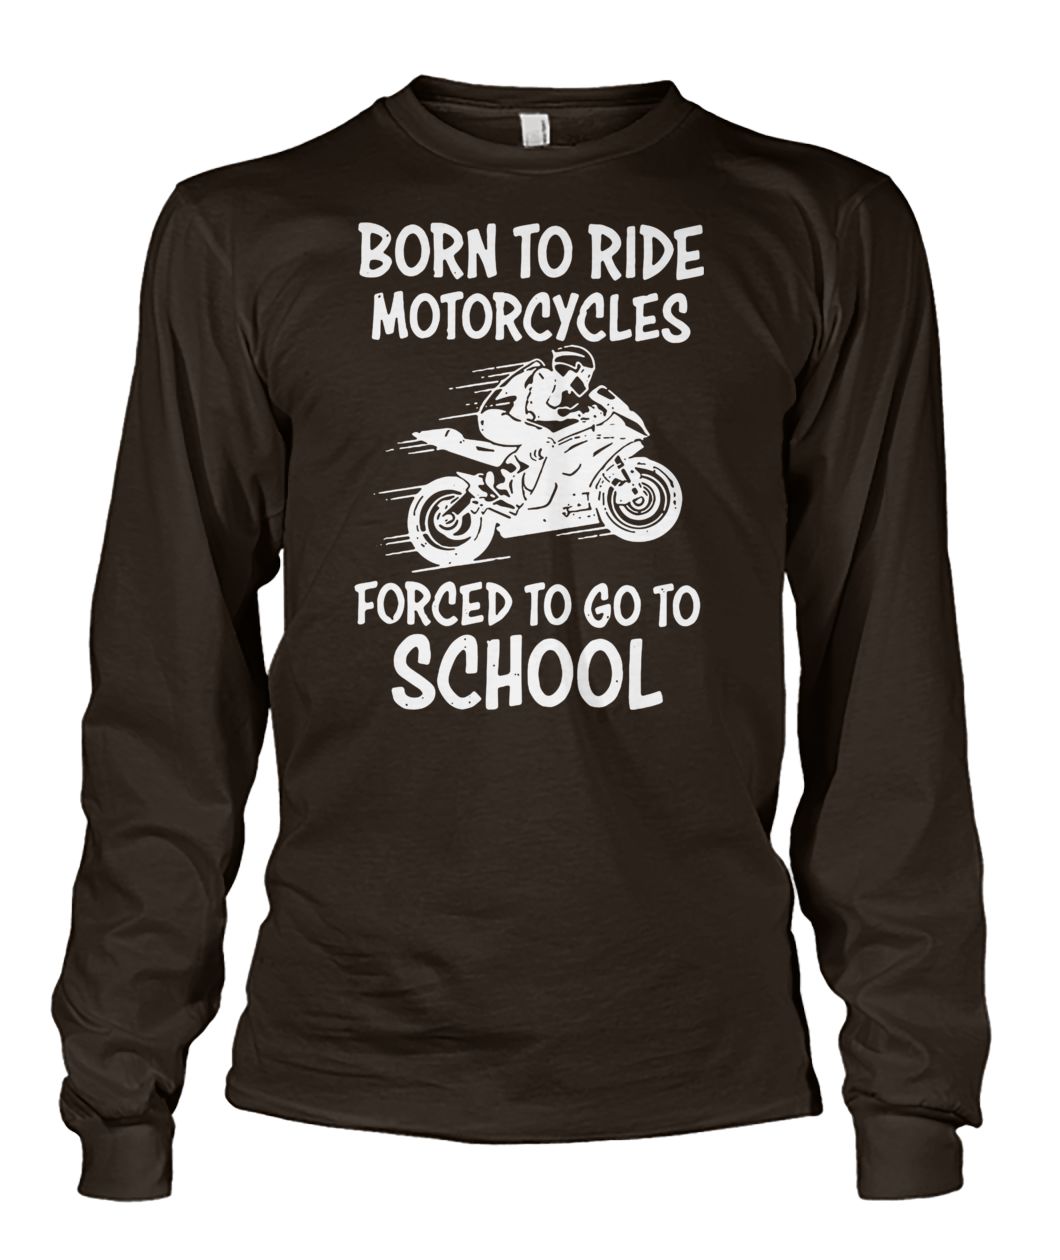 Born to ride motorcycles forced to go to school unisex long sleeve